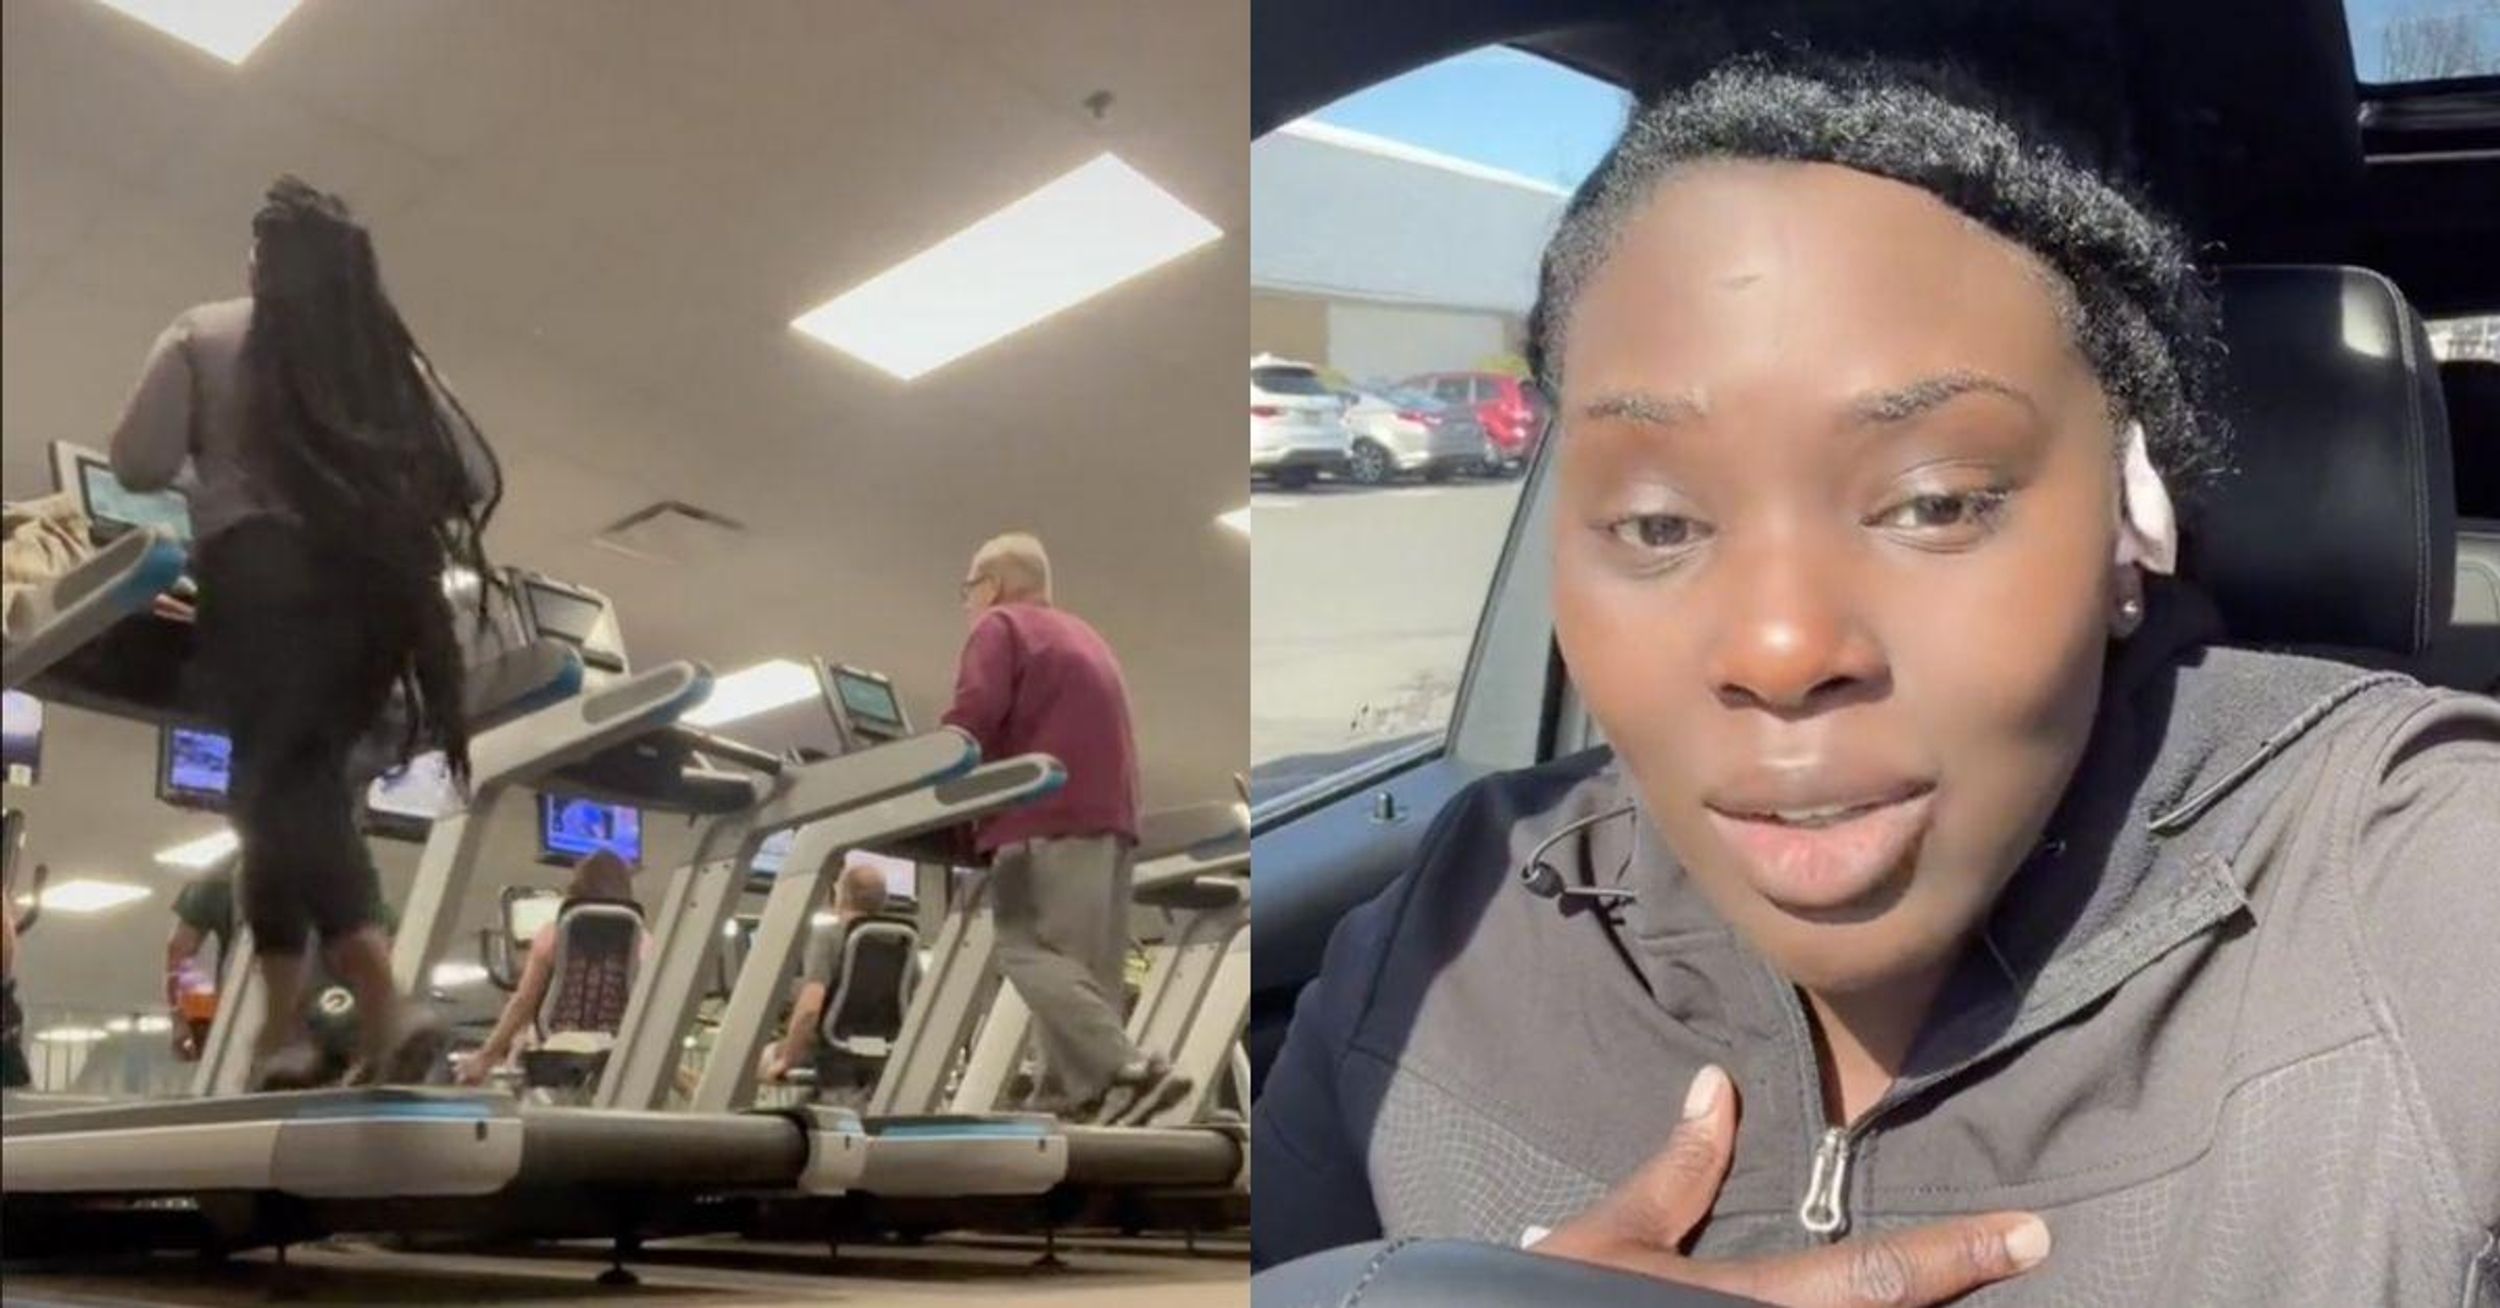 White Man Confronted At Gym After Telling Black Woman Her Hair Would Make A Good Mop